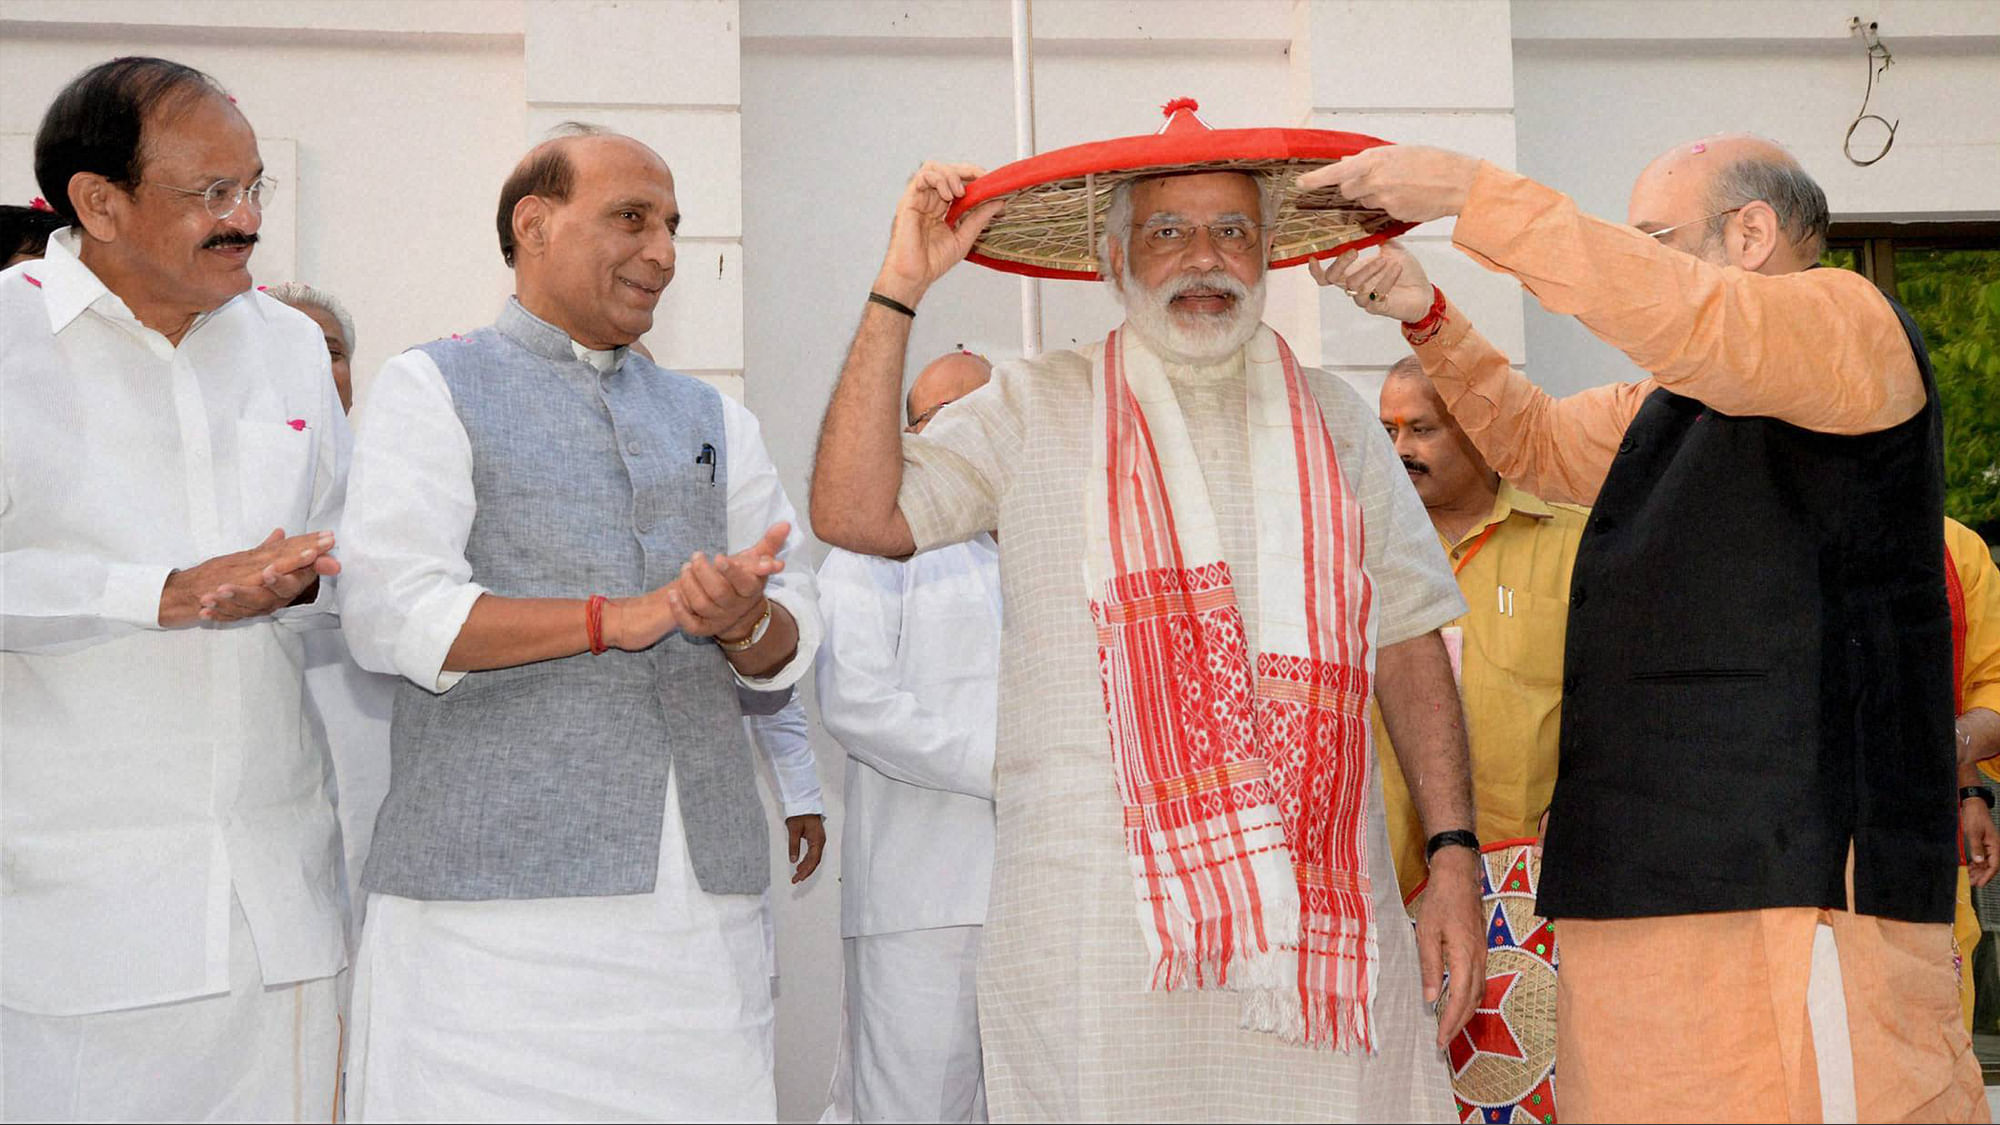 BJP President Amit Shah presents an Assamese japi and Gamocha to Prime Minister Narendra Modi on his arrival at the party office in New Delhi on Thursday for a meeting after Assembly poll results. (Photo: PTI)